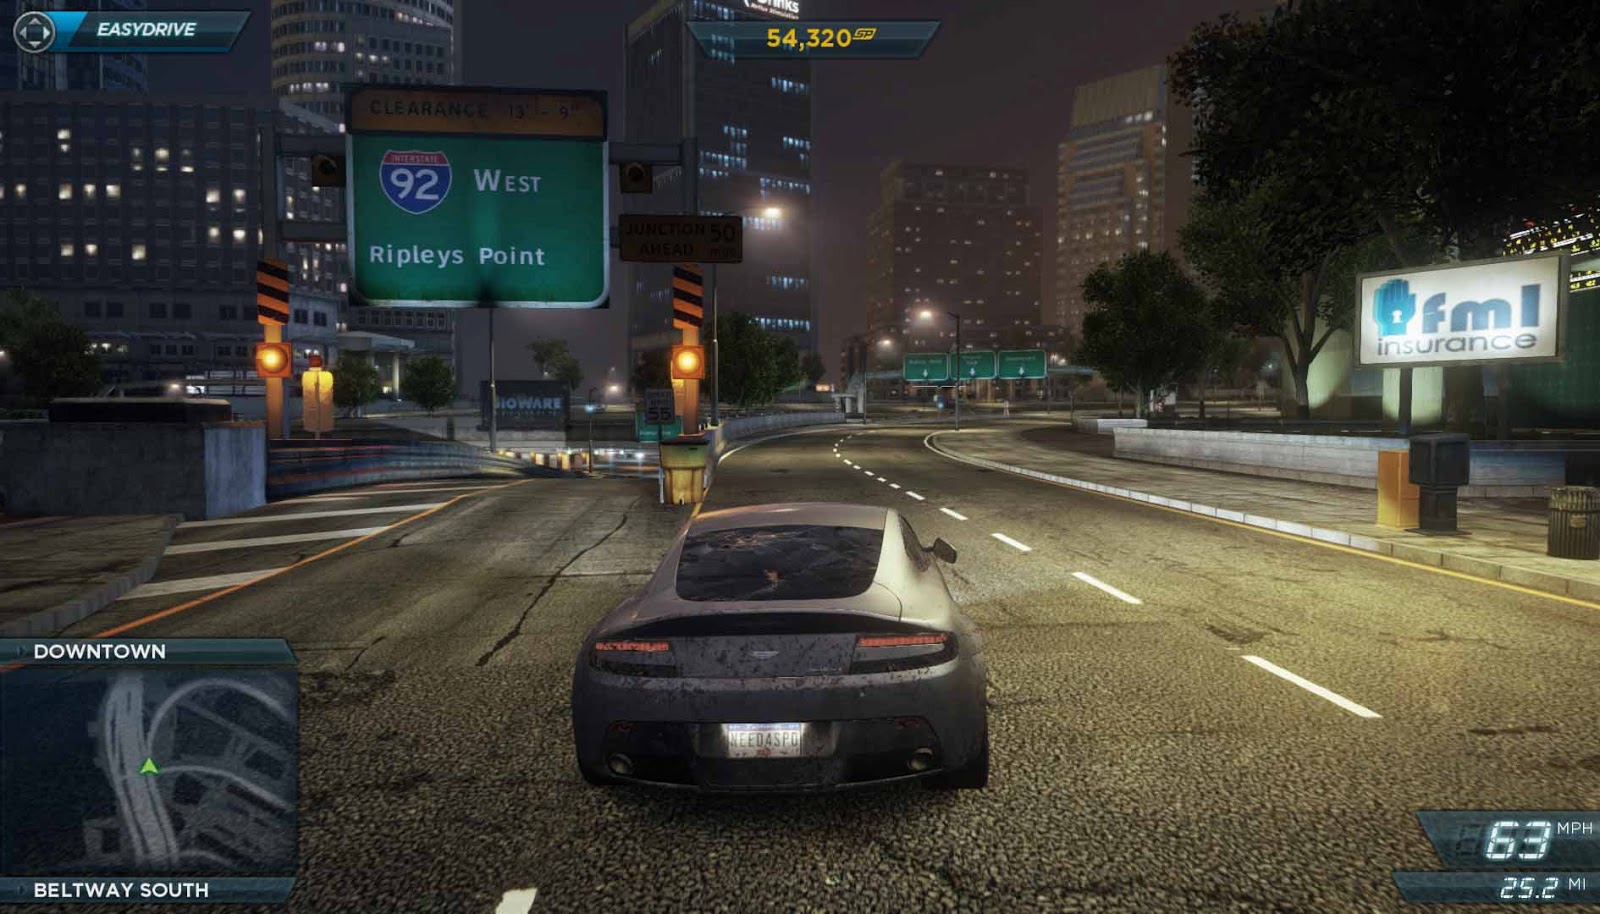 need for speed most wanted portable pc game full version